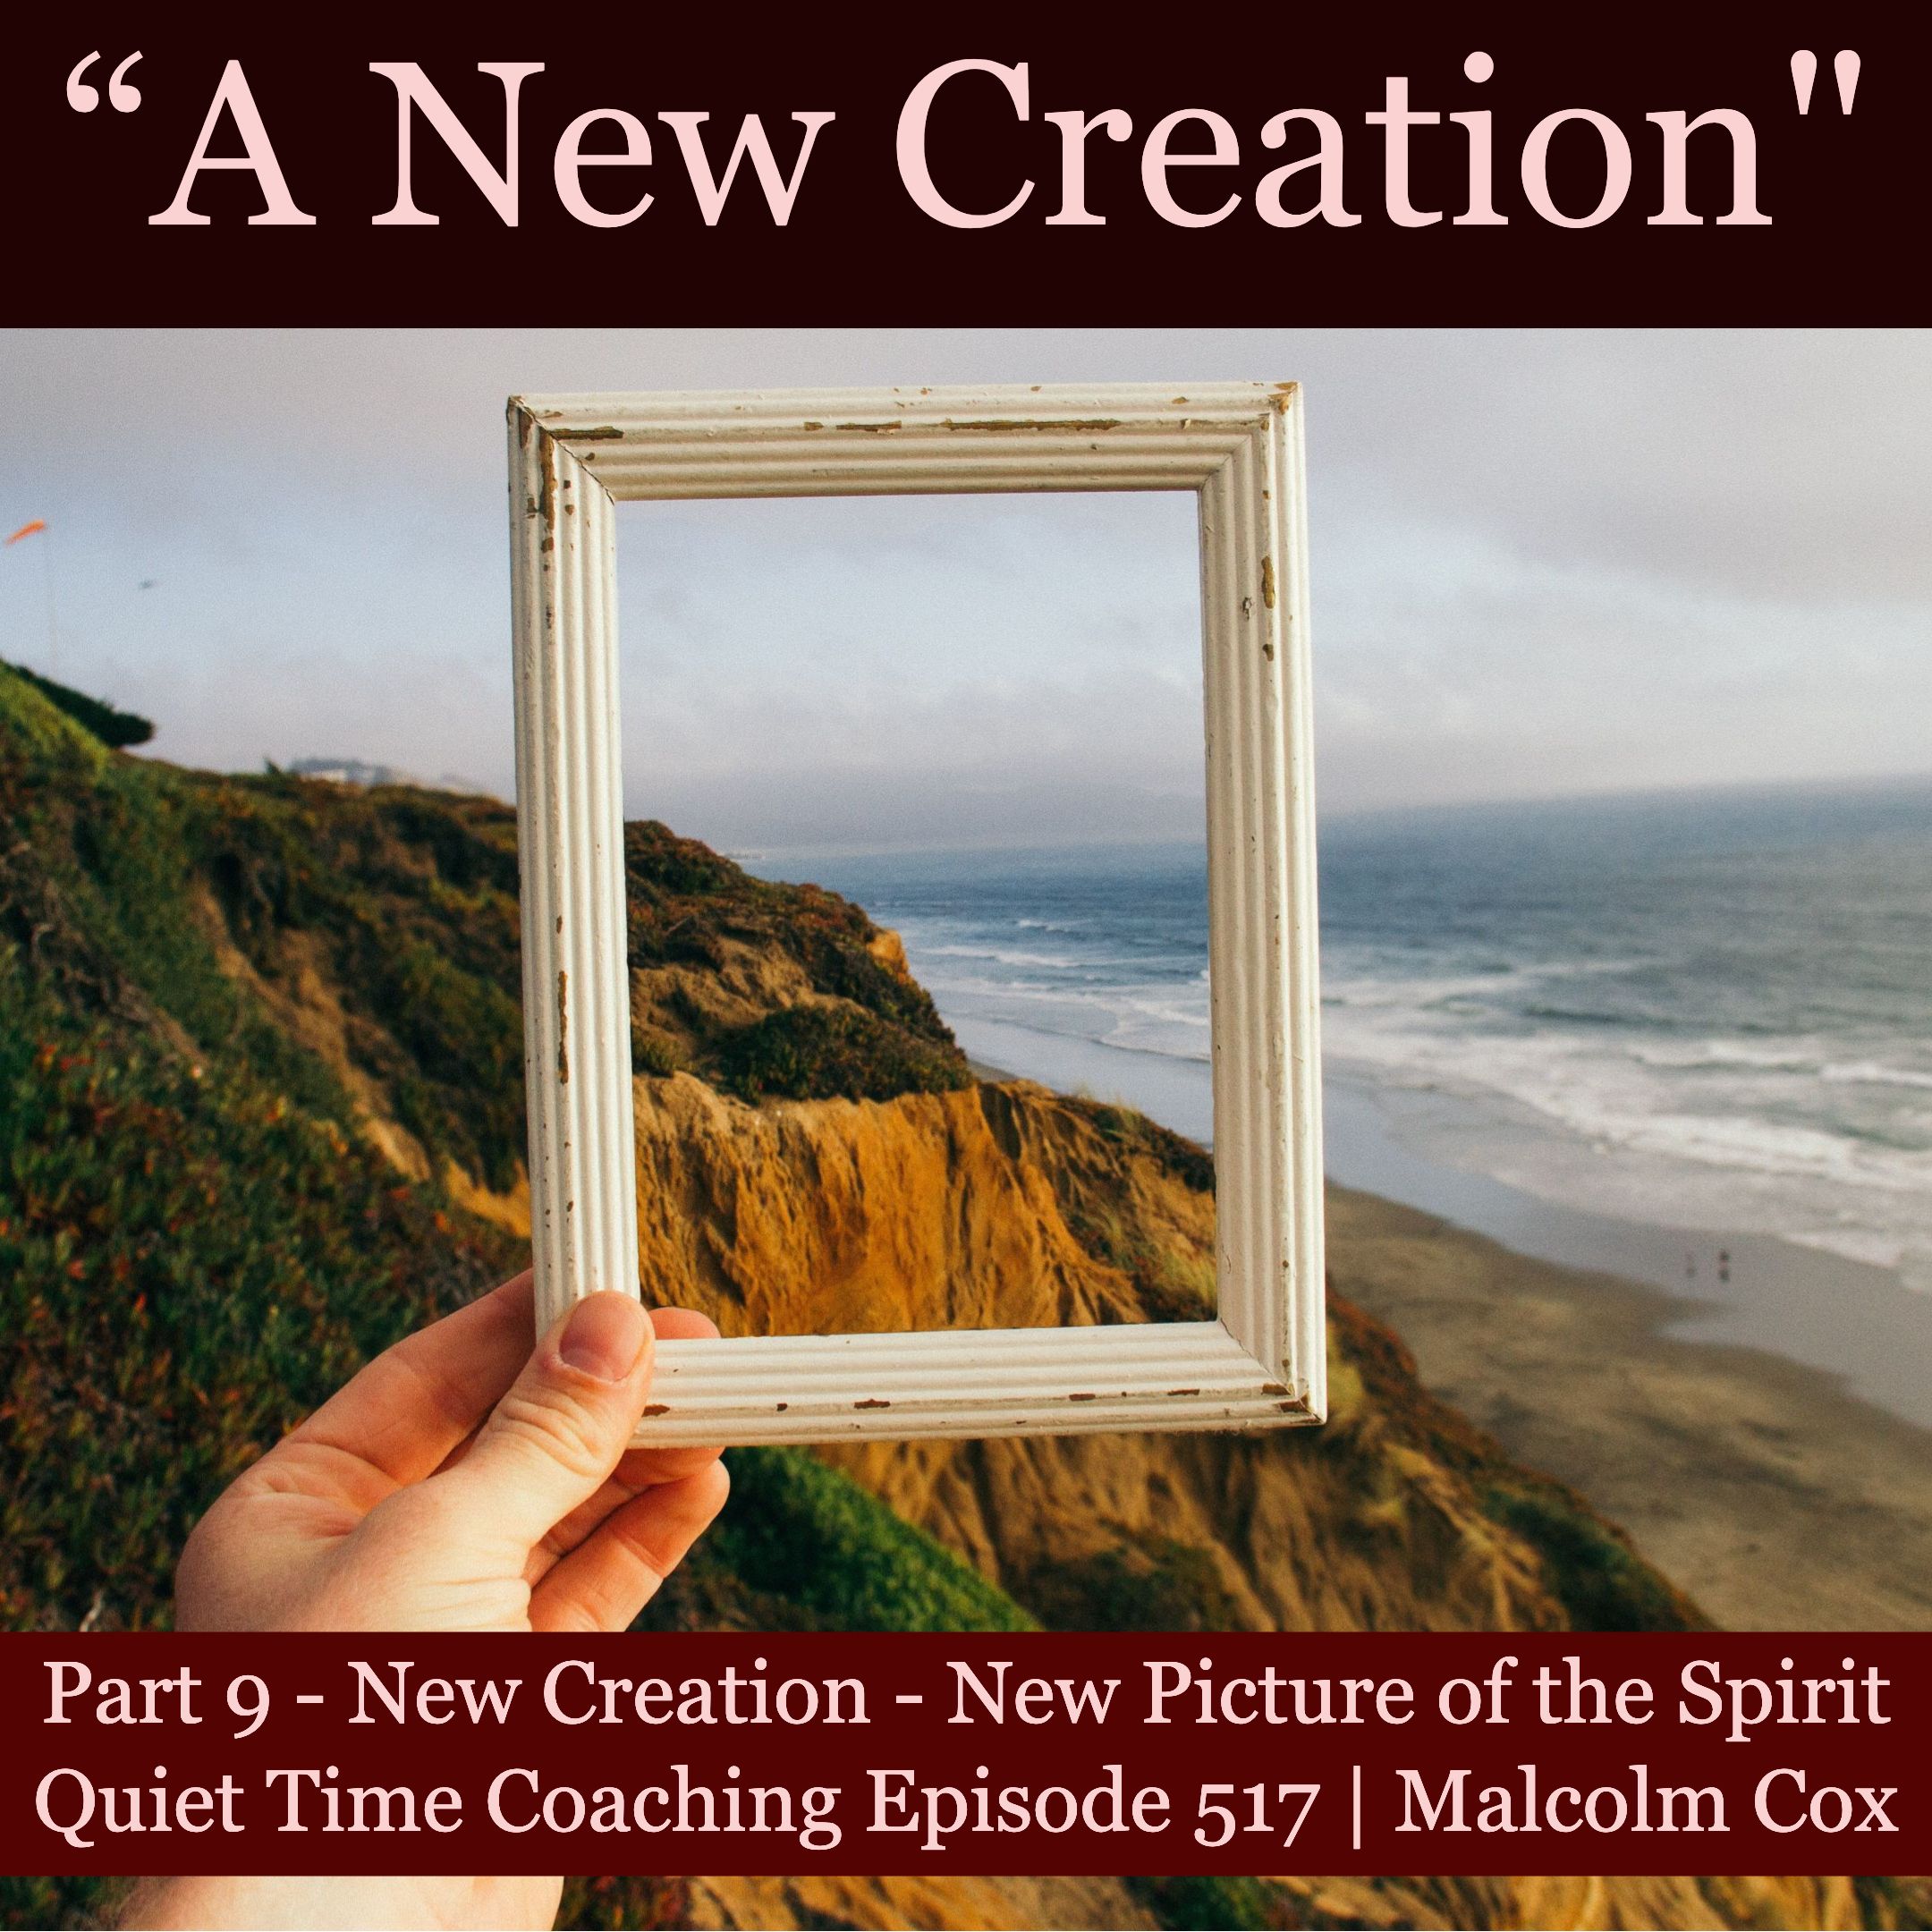 S2 Ep2193: Quiet Time Coaching Episode 517 | New Creation Series — Part 9 | “New Creation - New Spirit” | Malcolm Cox